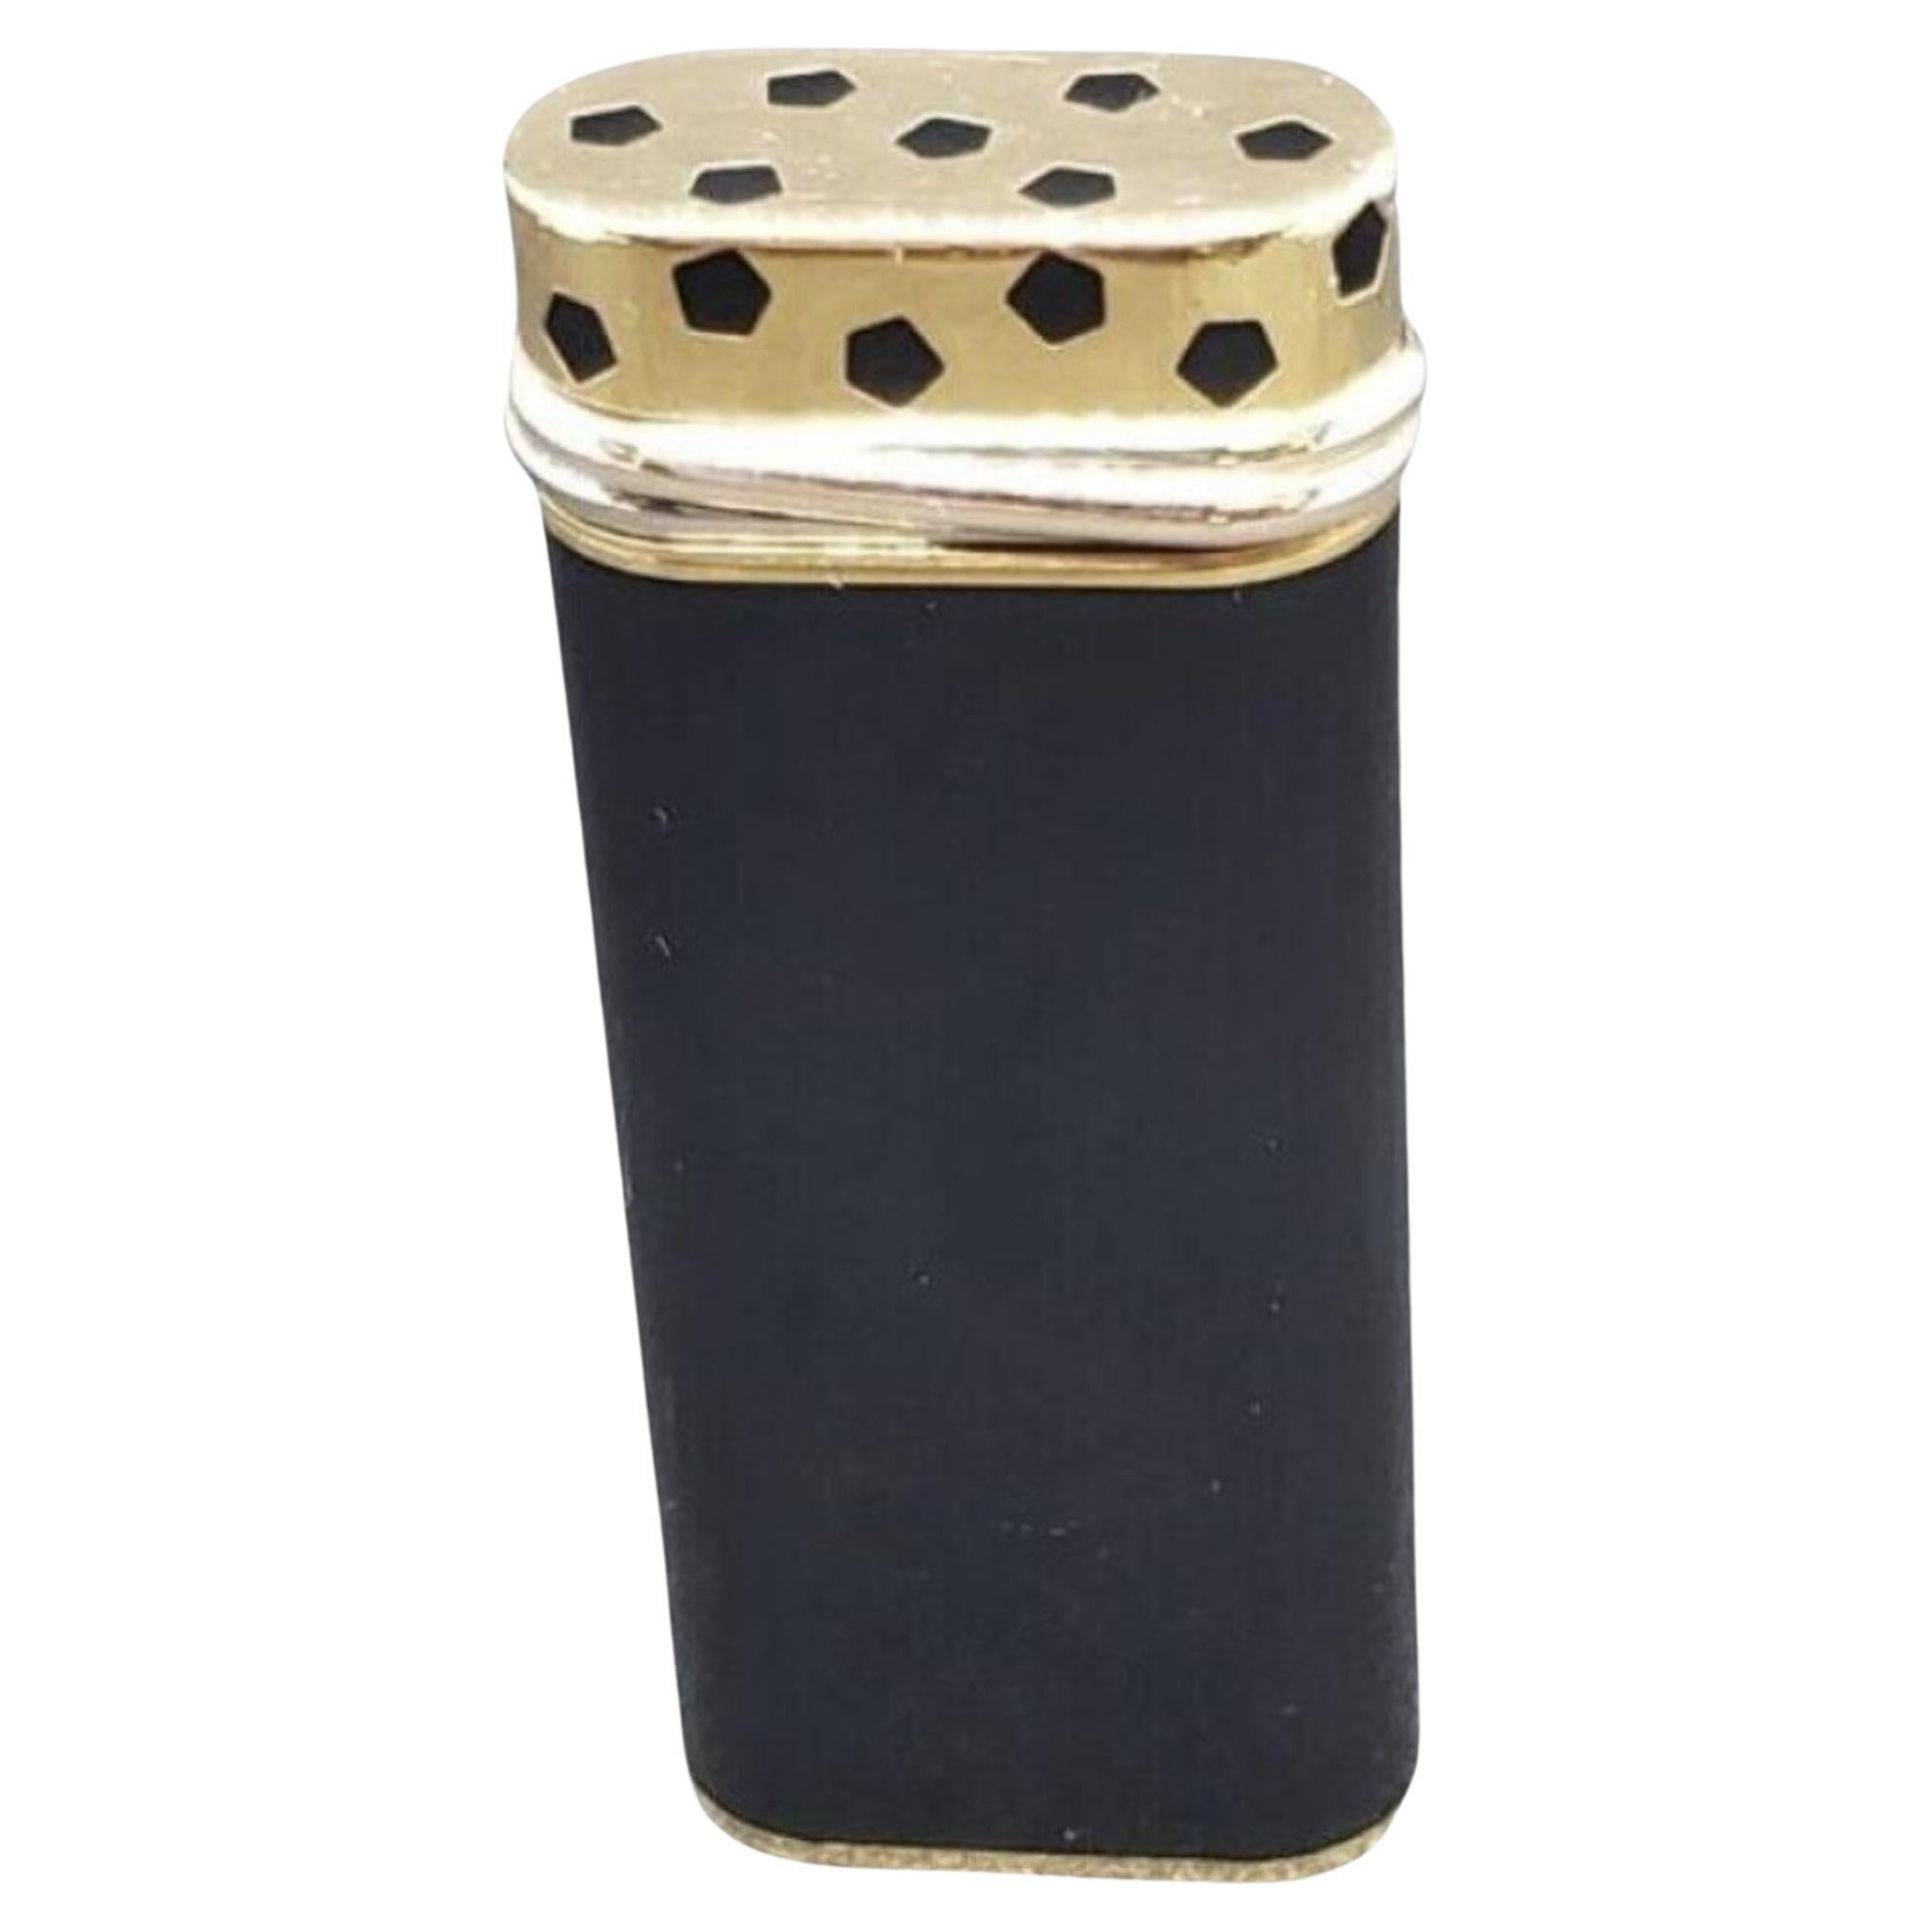 Cartier Rare TRINITY 
Black Lacquer & 18 K Gold plated lighter 
Circa 2000
In fantastic condition 
The Lighter comes with a original Cartier case 
Original Cartier certificate, booklet & papers 
Original Cartier booklet cover 
The lighter, sparks,